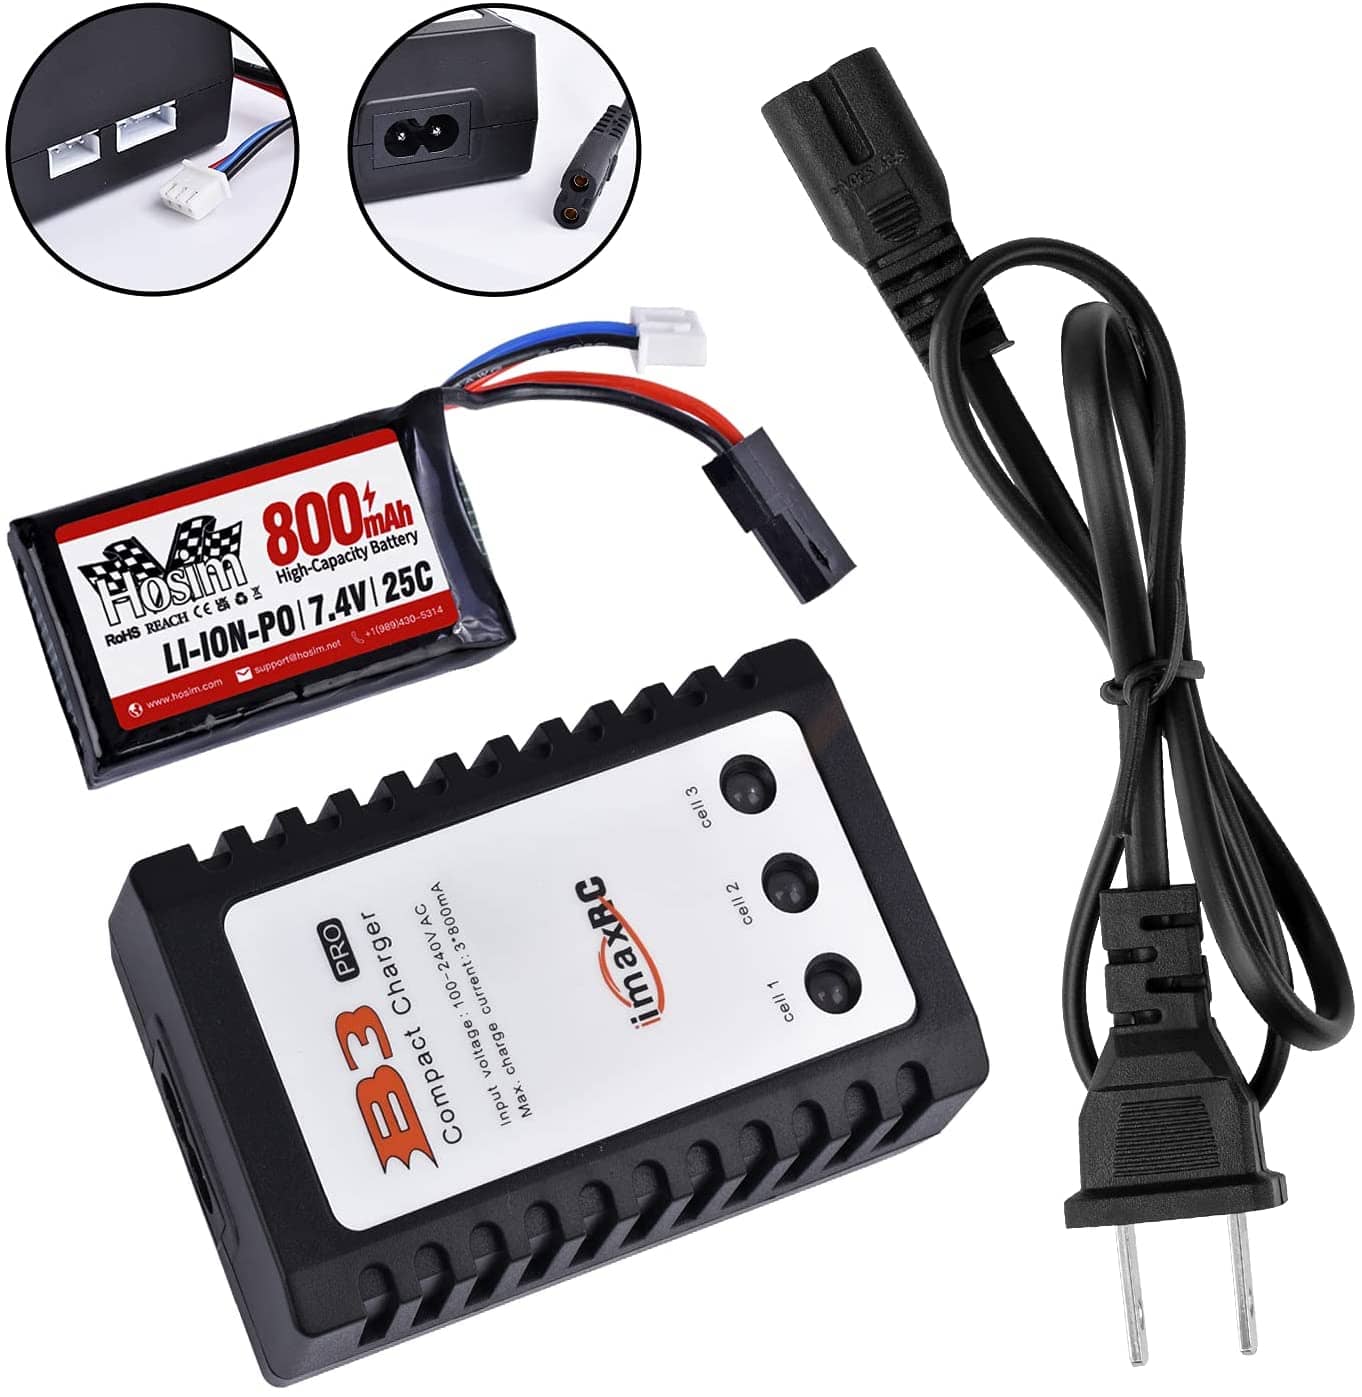 Hosim 7.4V 800mAh RC Car Rechargeable Li-Po Battery & 1pcs Balance Charge,Spare Replacement Parts Assessory for 9130 9135 9136 9138 1/16 Scale All Terrain RC Truck Battery